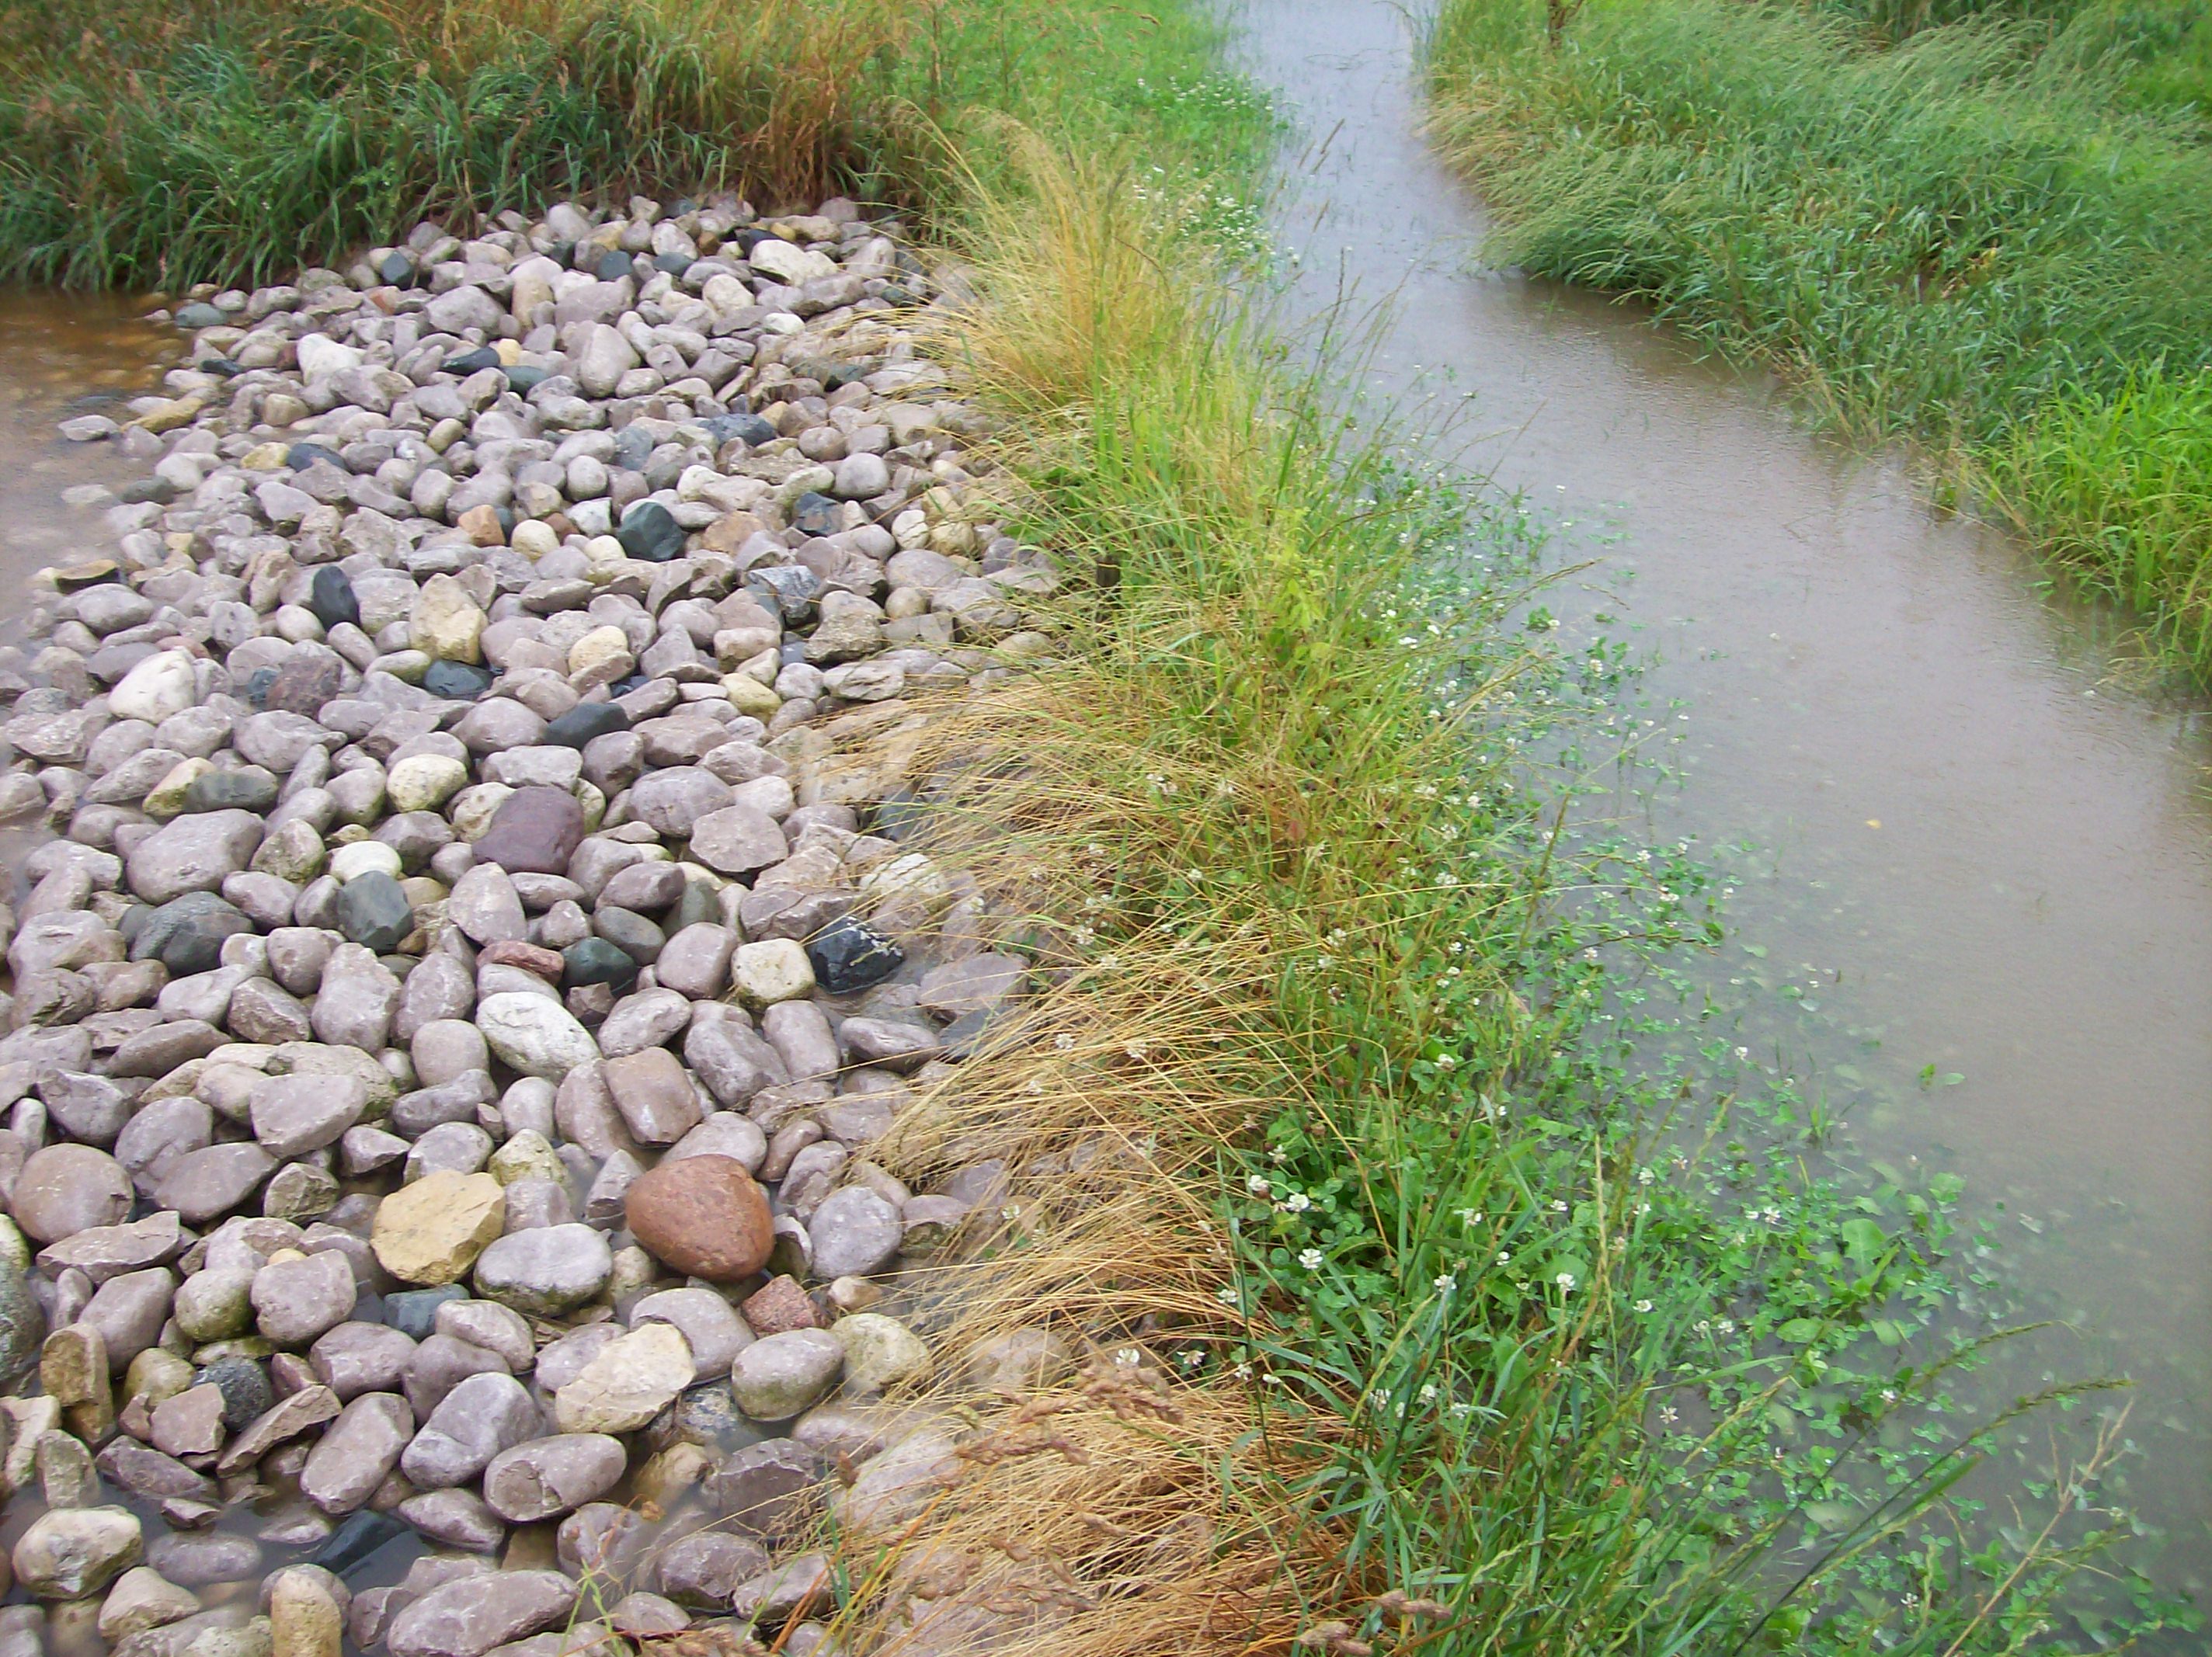 Photo showing the rocked emergency overflow spillway from the holding pond into the vegetated flow path during an extreme runoff event to prevent overtopping of the berm structure. Water in the right side of the photo is stored in the holding pond and is flowing to the left through the rocks to enter vegetated area without causing erosion damage.